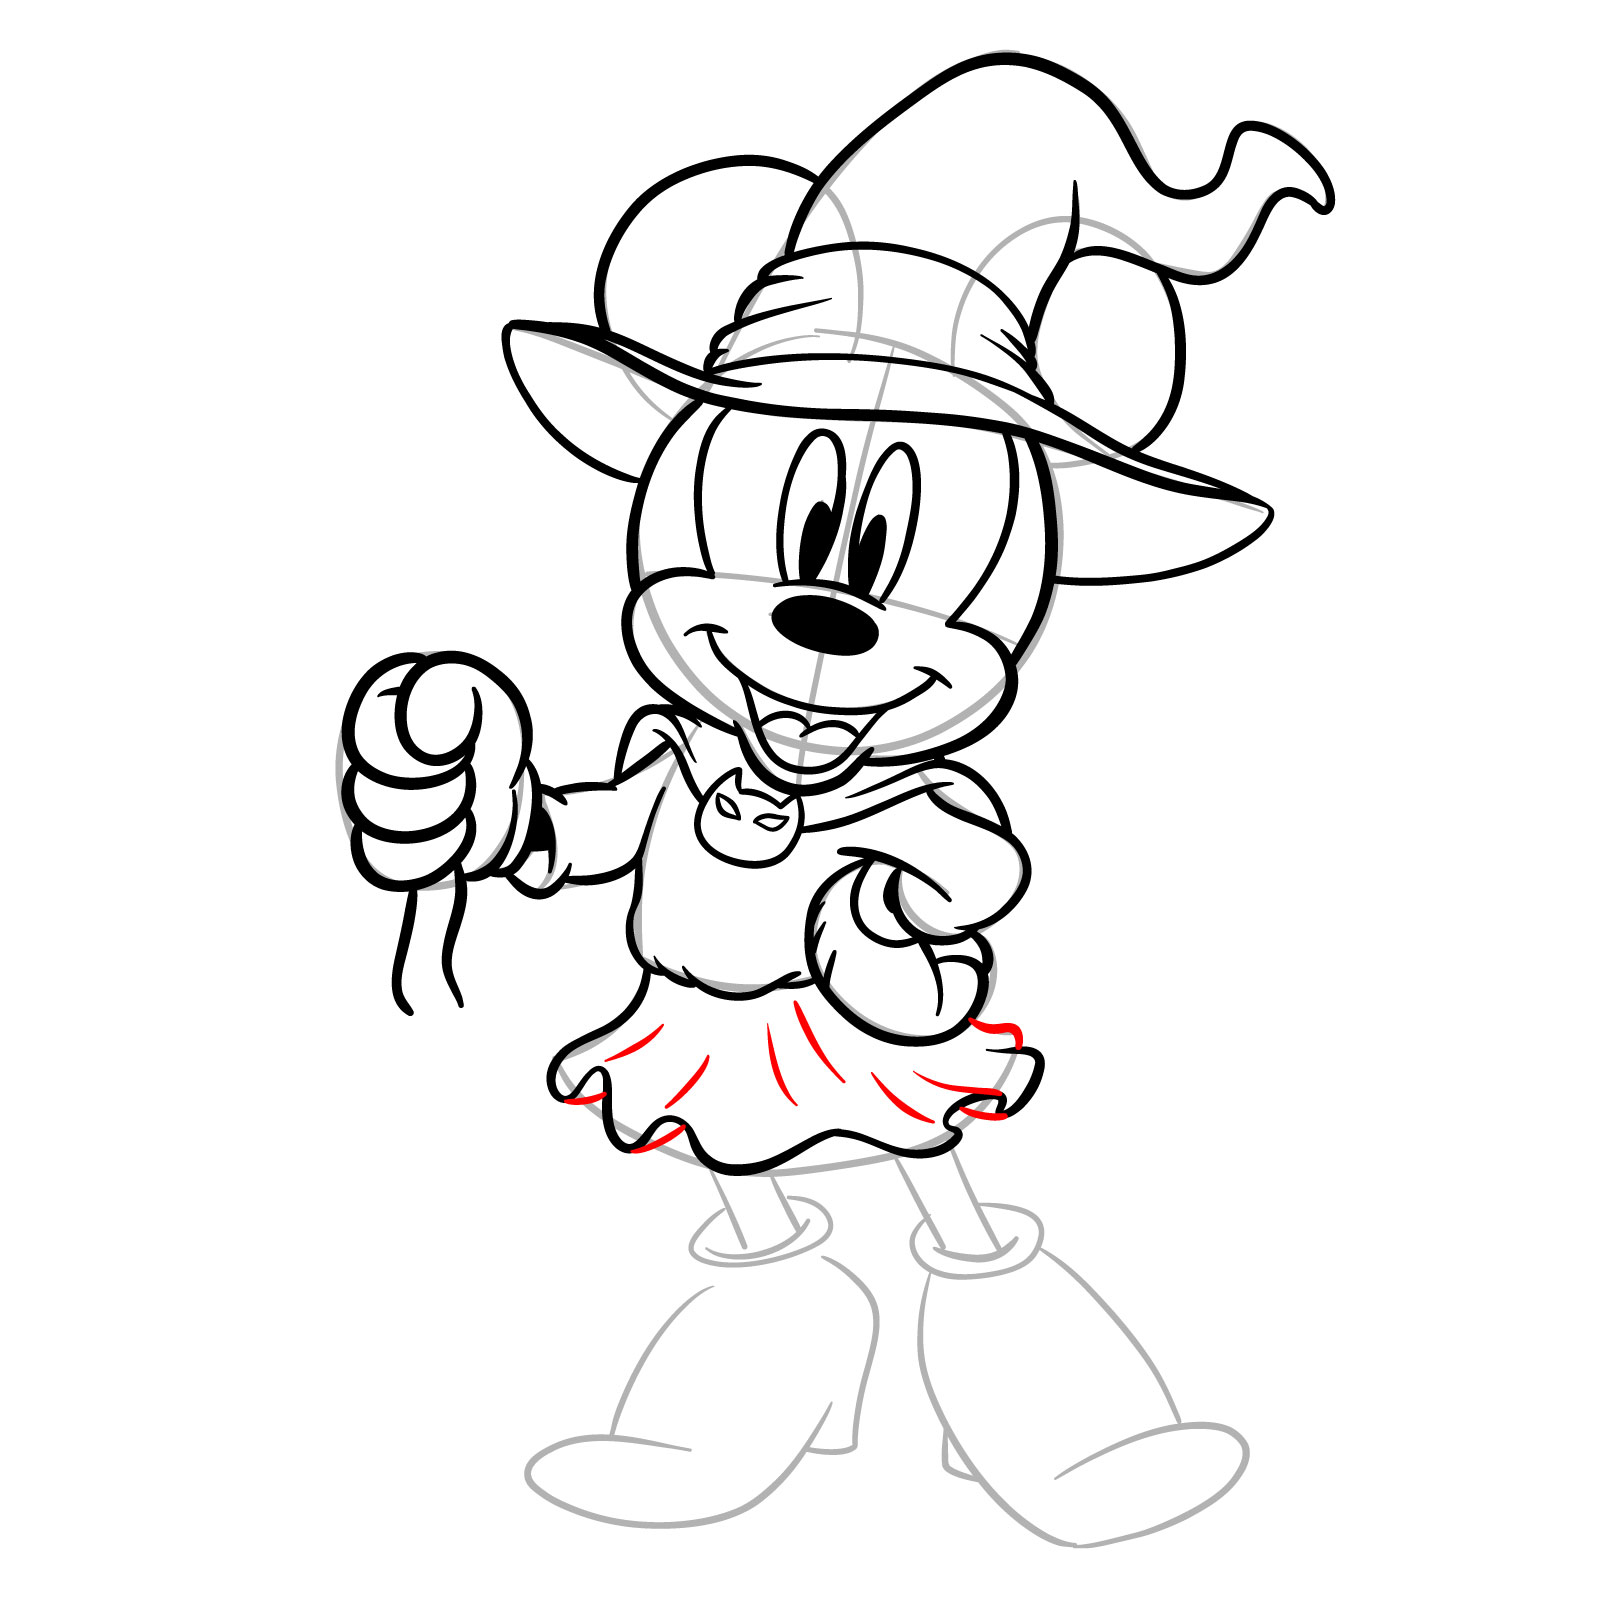 How to draw Halloween Minnie Mouse as a witch - step 24